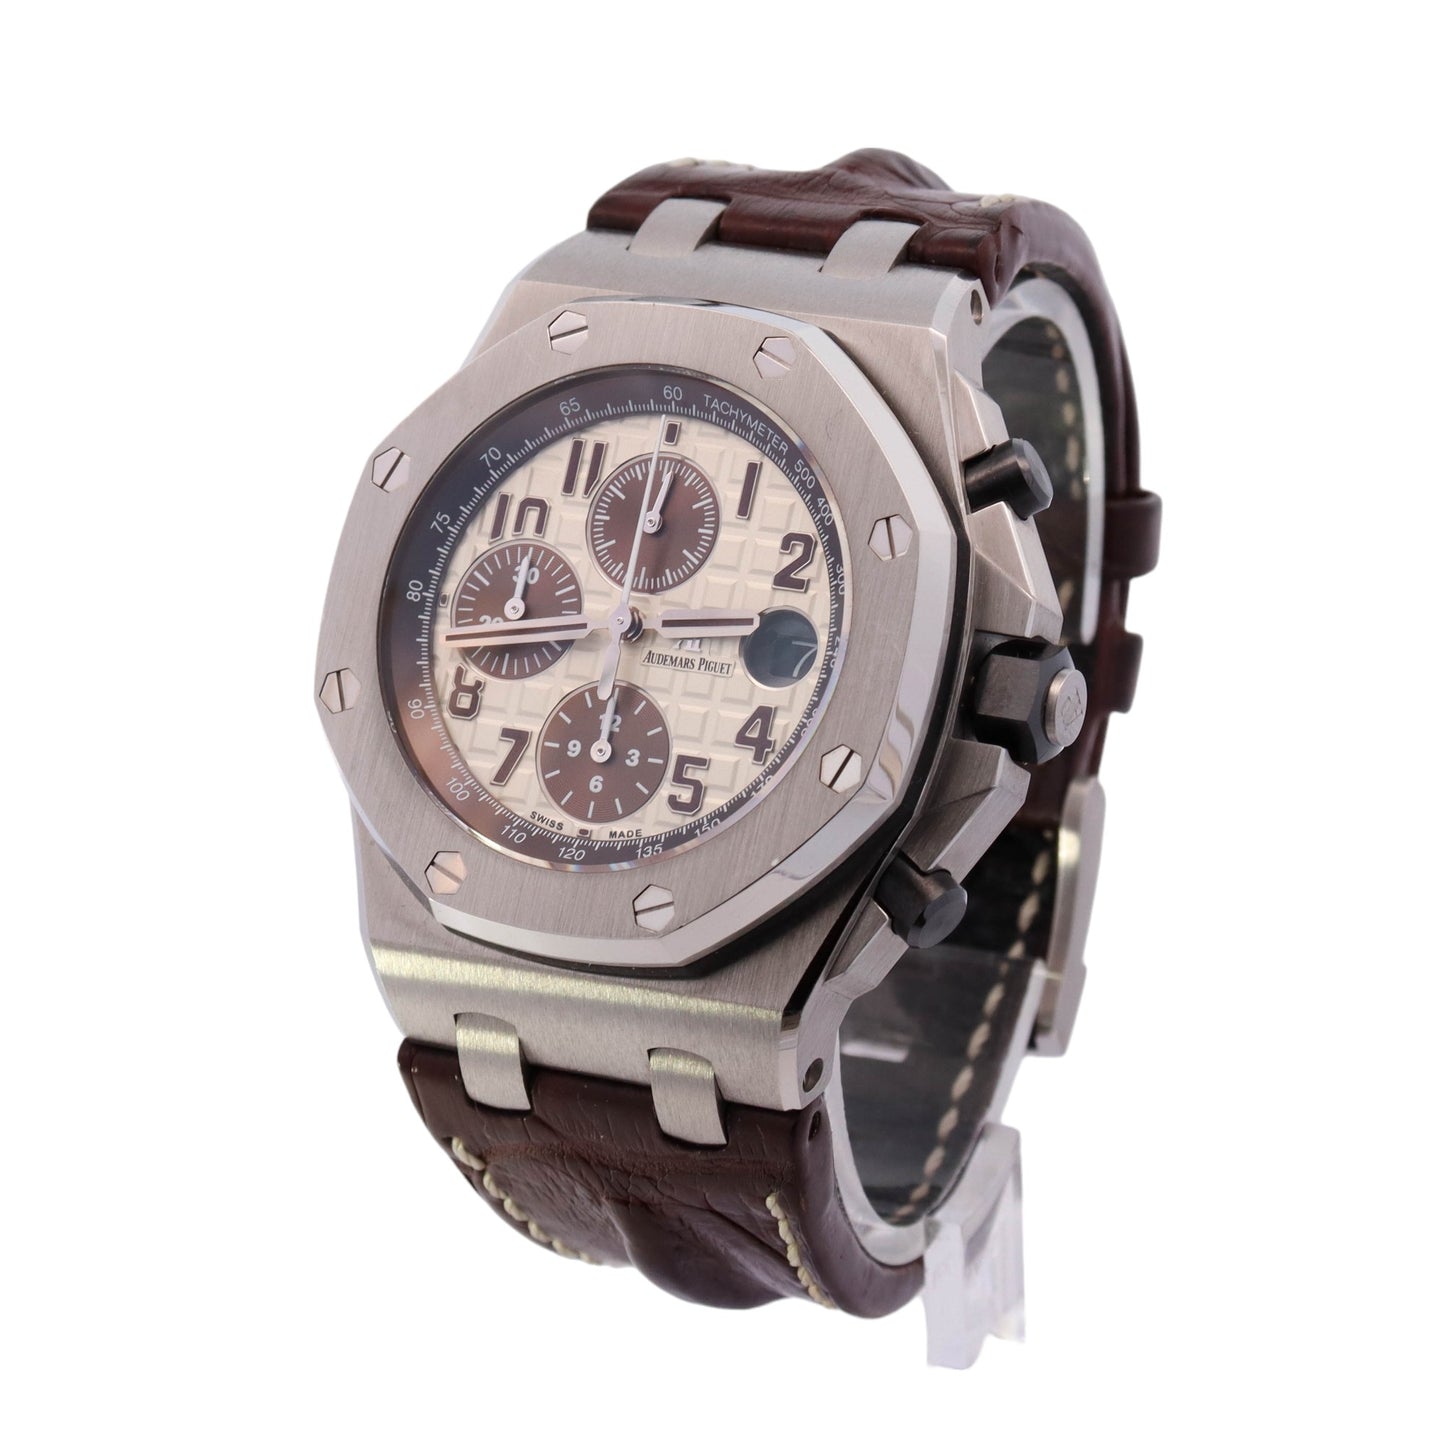 Audemars Piguet Royal Oak Offshore Stainless Steel 42mm Brown and Tan Chronograph Dial Watch Reference# 26470ST.OO.A801CR.01 - Happy Jewelers Fine Jewelry Lifetime Warranty